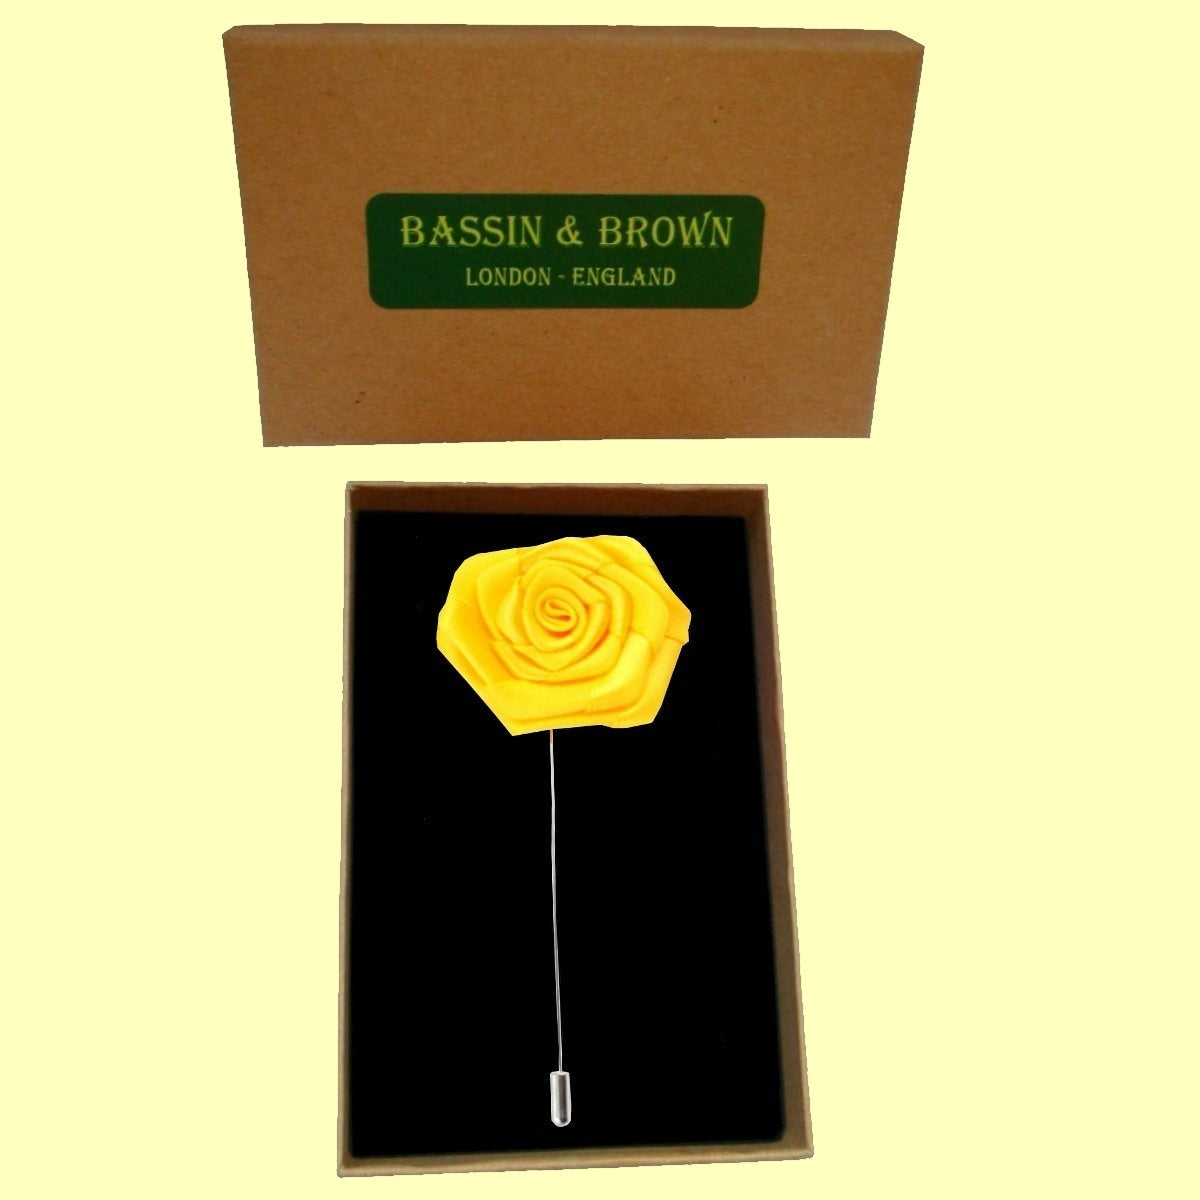 Shop Awards and Gifts Yellow Rose Flower Enamel Metal Lapel Pin, Retro Pins for Clothes, Bulk Pack of 12, Poly Bagged, 7/8 inch